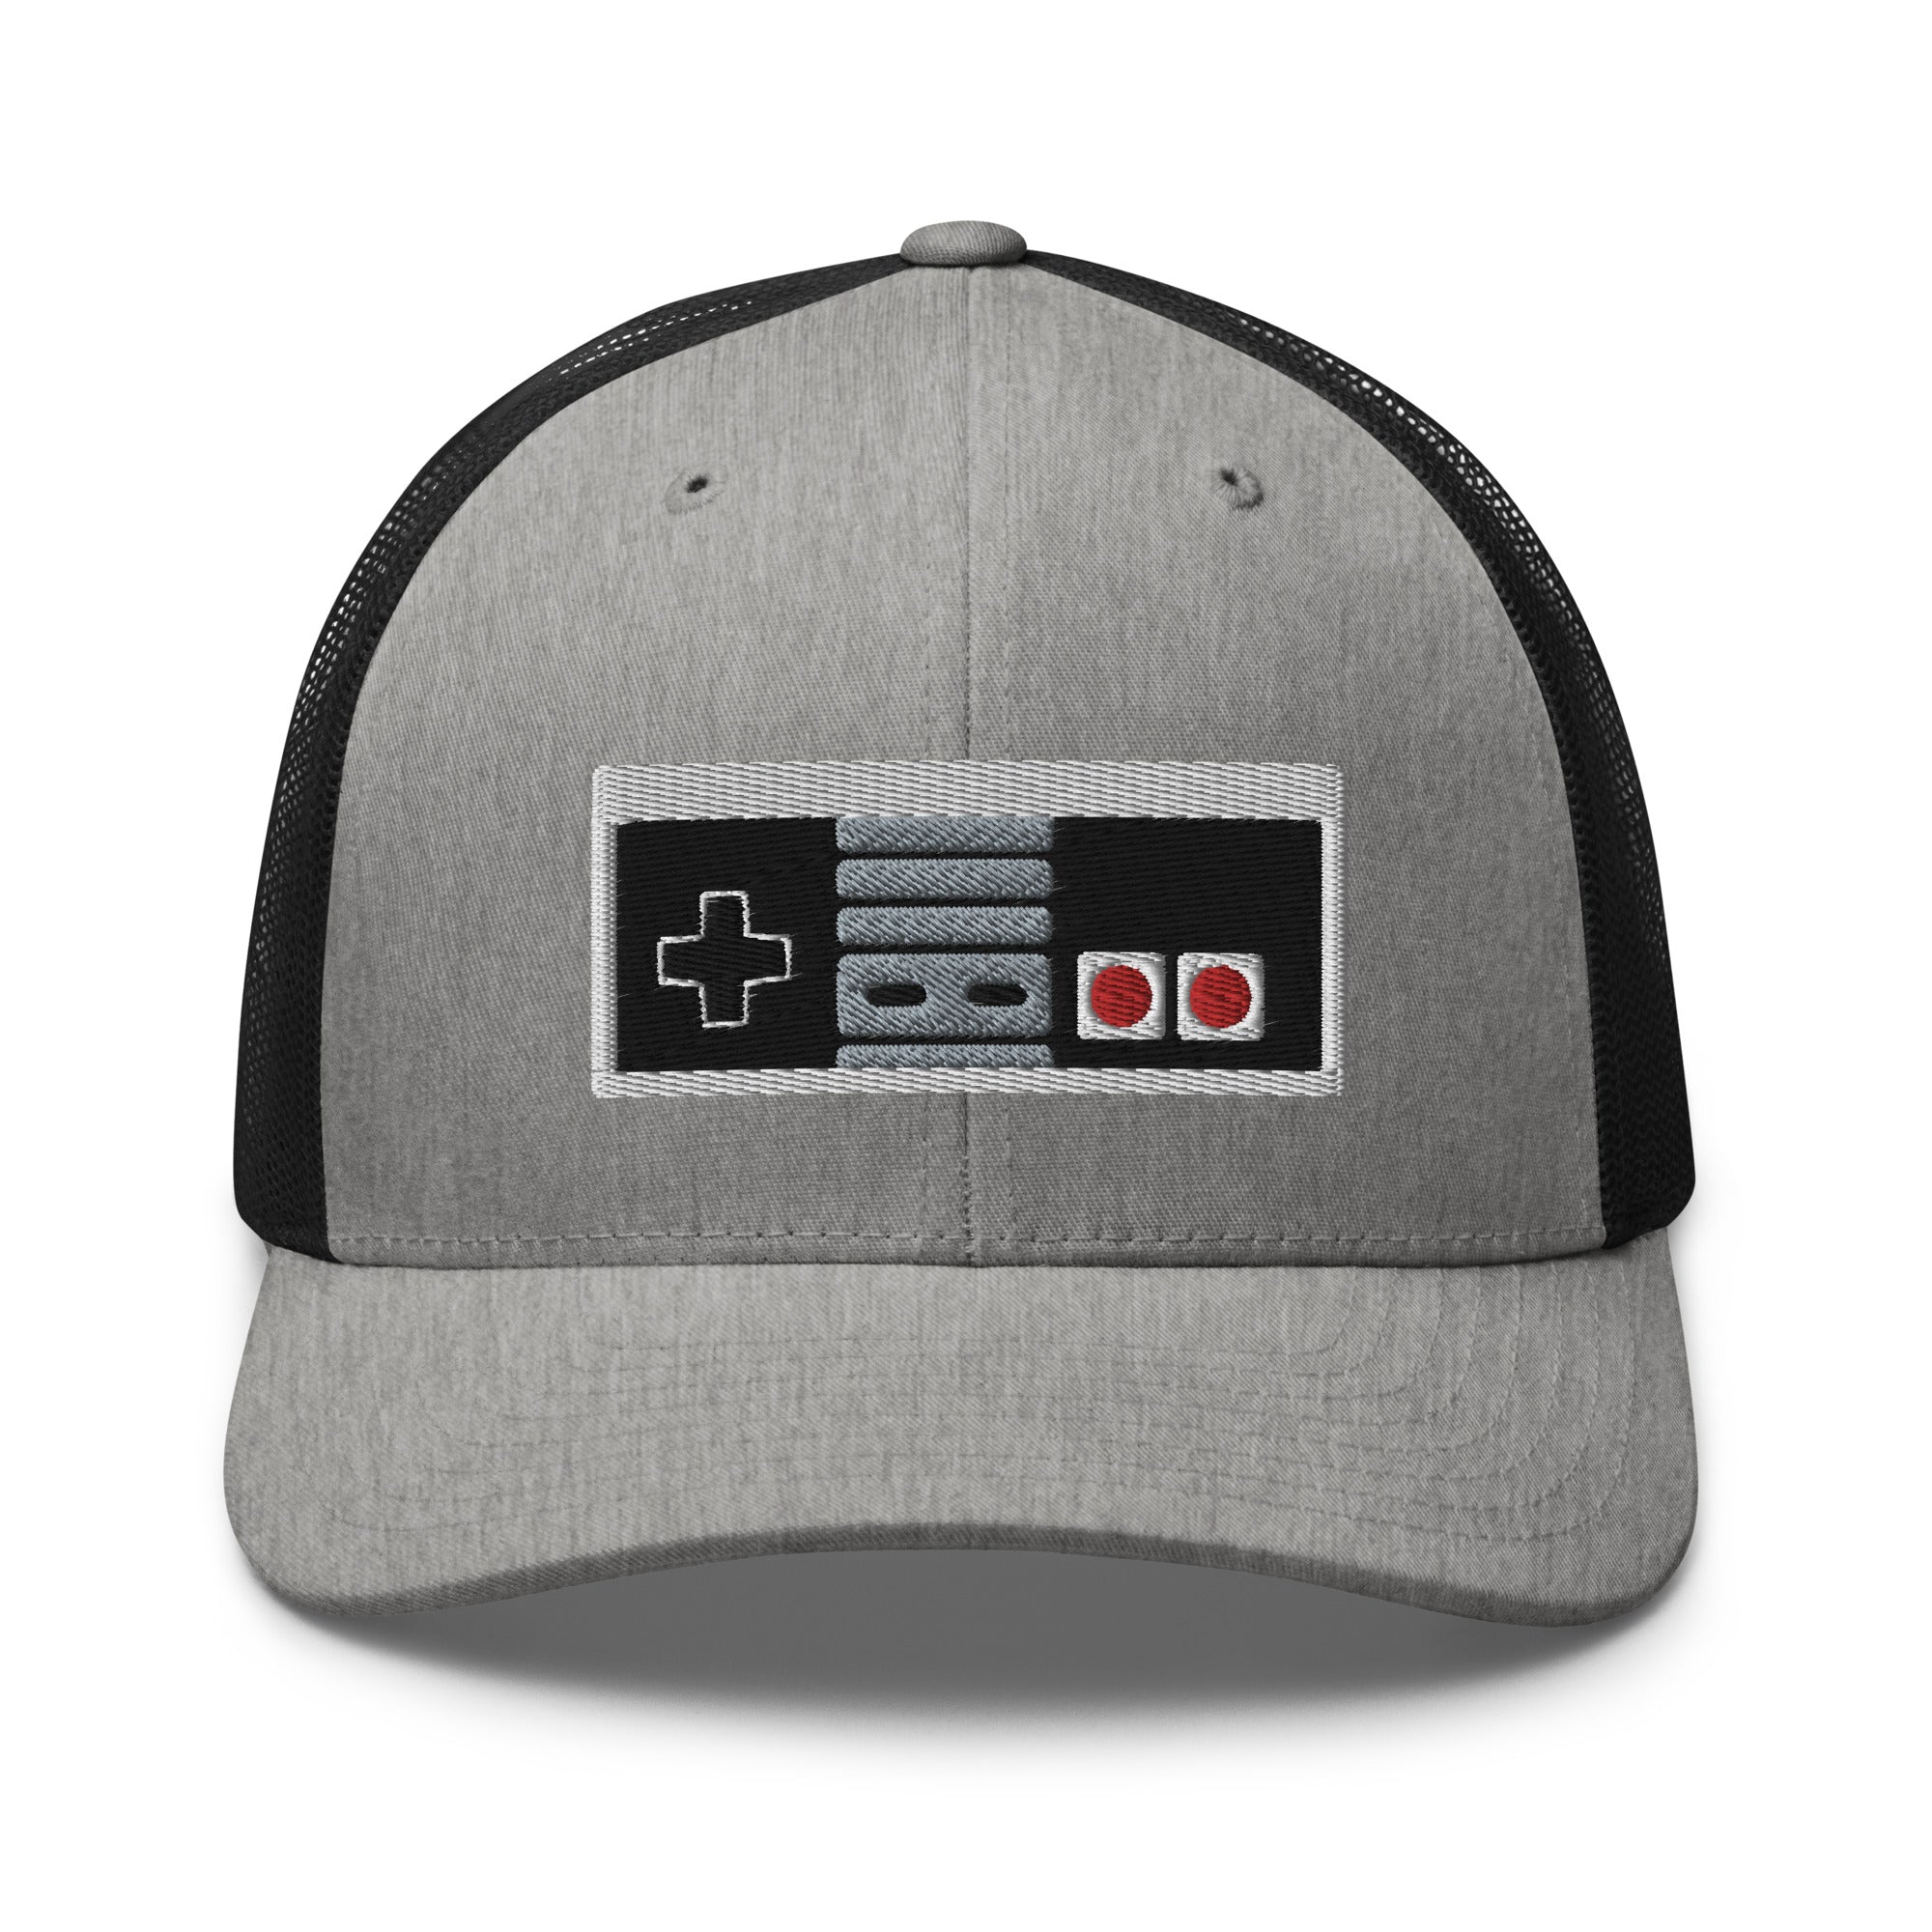 Classic 80's Game Controller Embroidered Retro Trucker Cap Snapback Hat